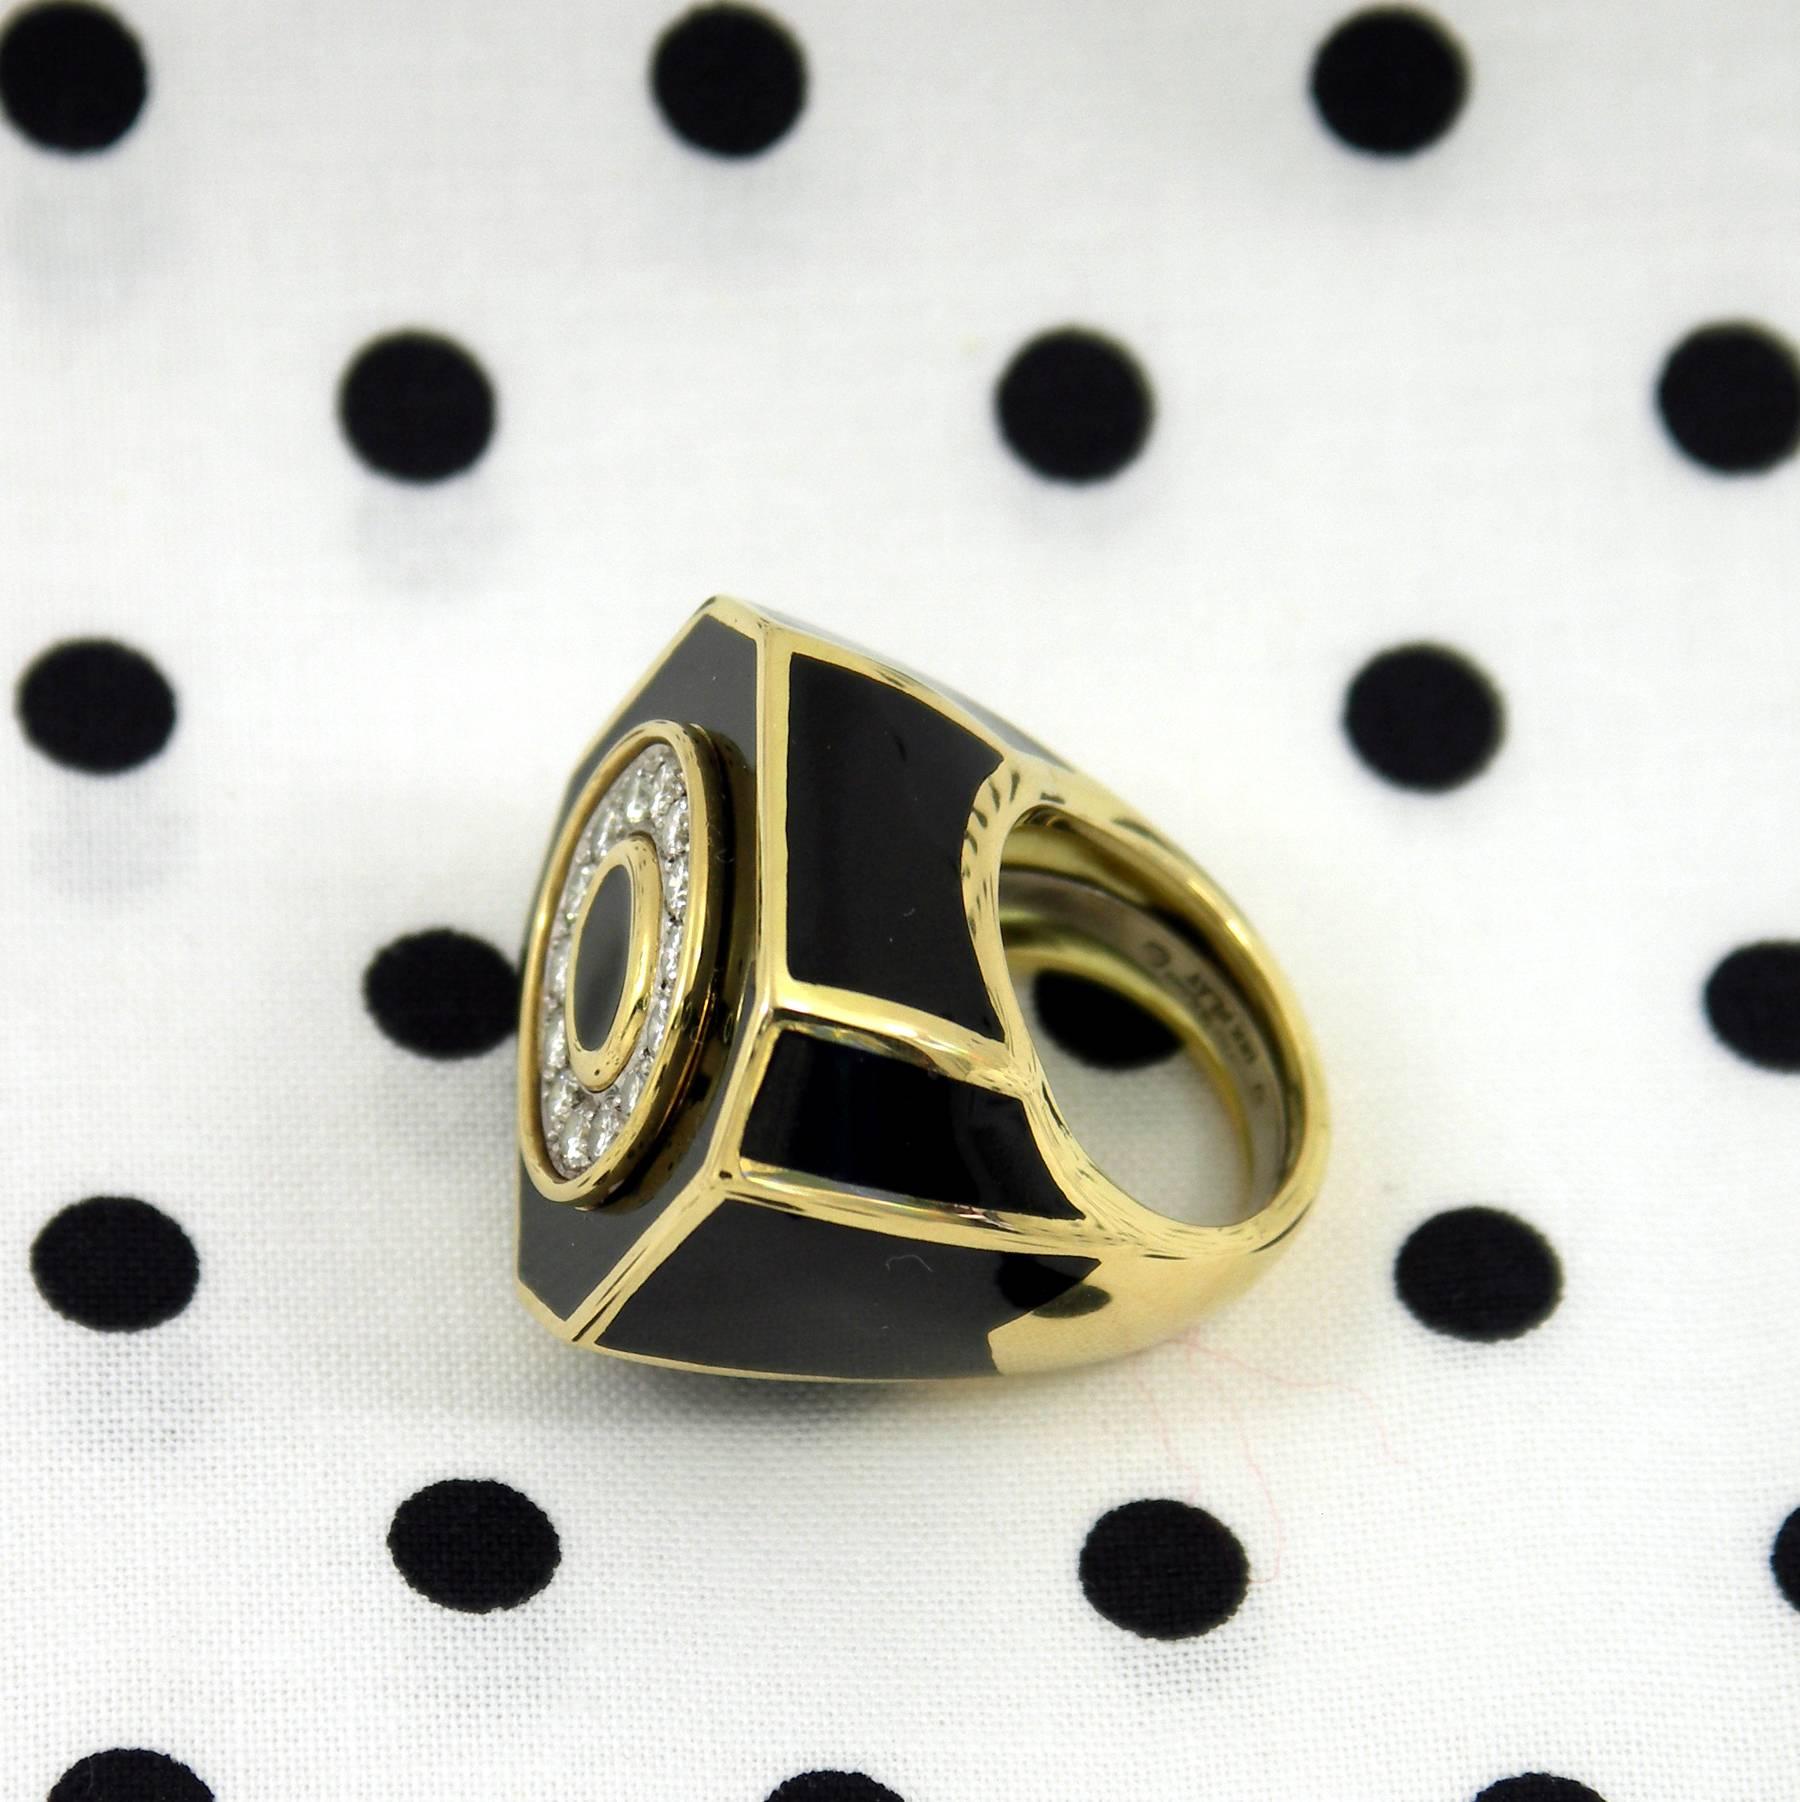 Big, bold and beautiful, this striking David Webb ring is made of 18K Yellow Gold with black enamel markings. The 14 round brilliant cut diamonds are
set into an oval shaped, platinum plate surrounded by a yellow gold channel.
The diamonds weigh